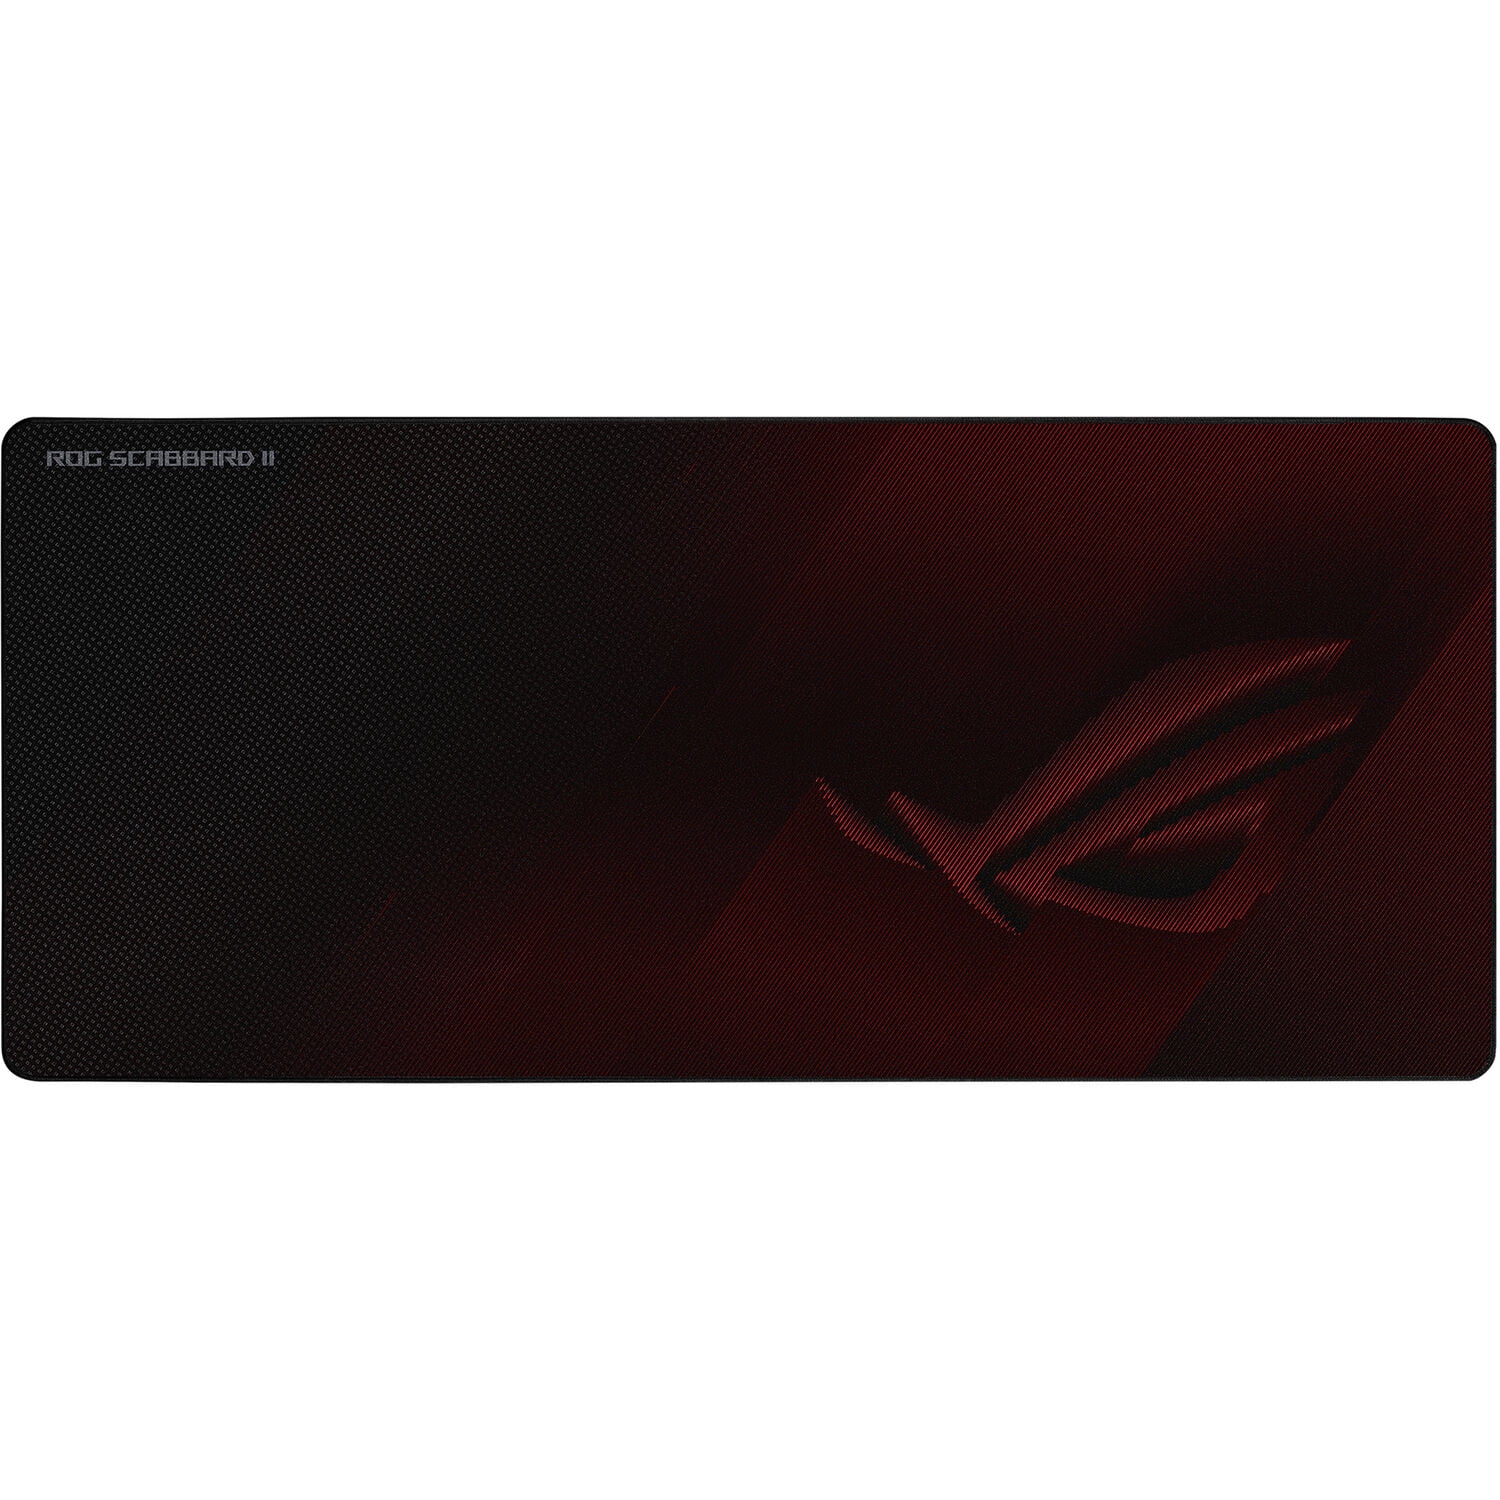 Nano Technology Smooth Glide Tracking Anti-Fray Flat-Stitched Edges Protective Coating for Water Non-Slip Rubber Bas ASUS ROG Scabbard II Extended Gaming Mouse Pad Oil Dust-Repelling Surface 